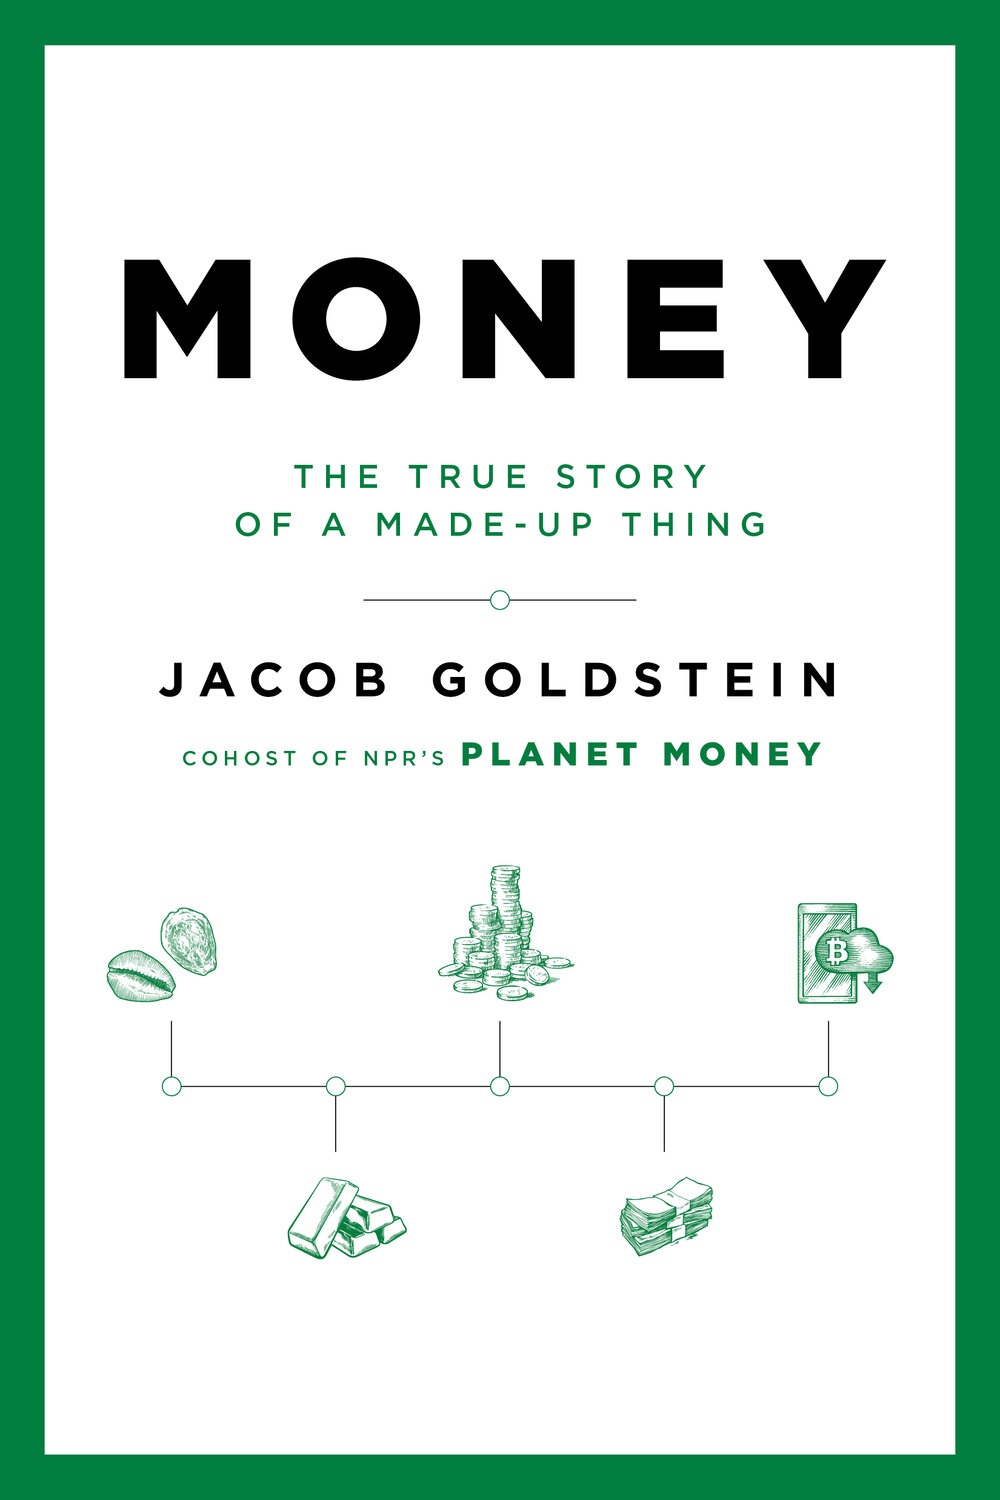 Money: The True Story of a Made-up Thing by Jacob Goldstein